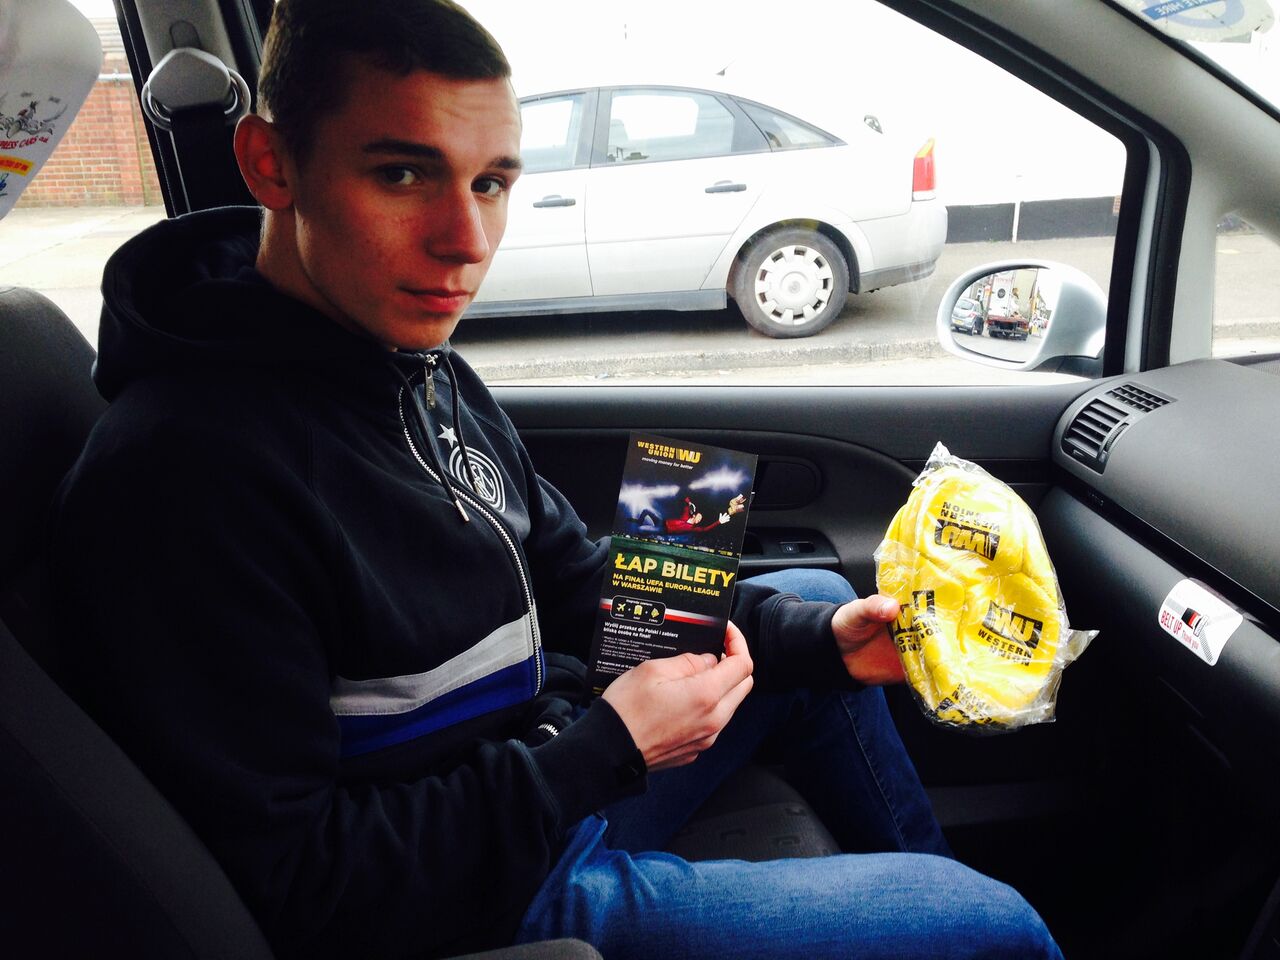 A man in a taxi holding a Western Union leaflet